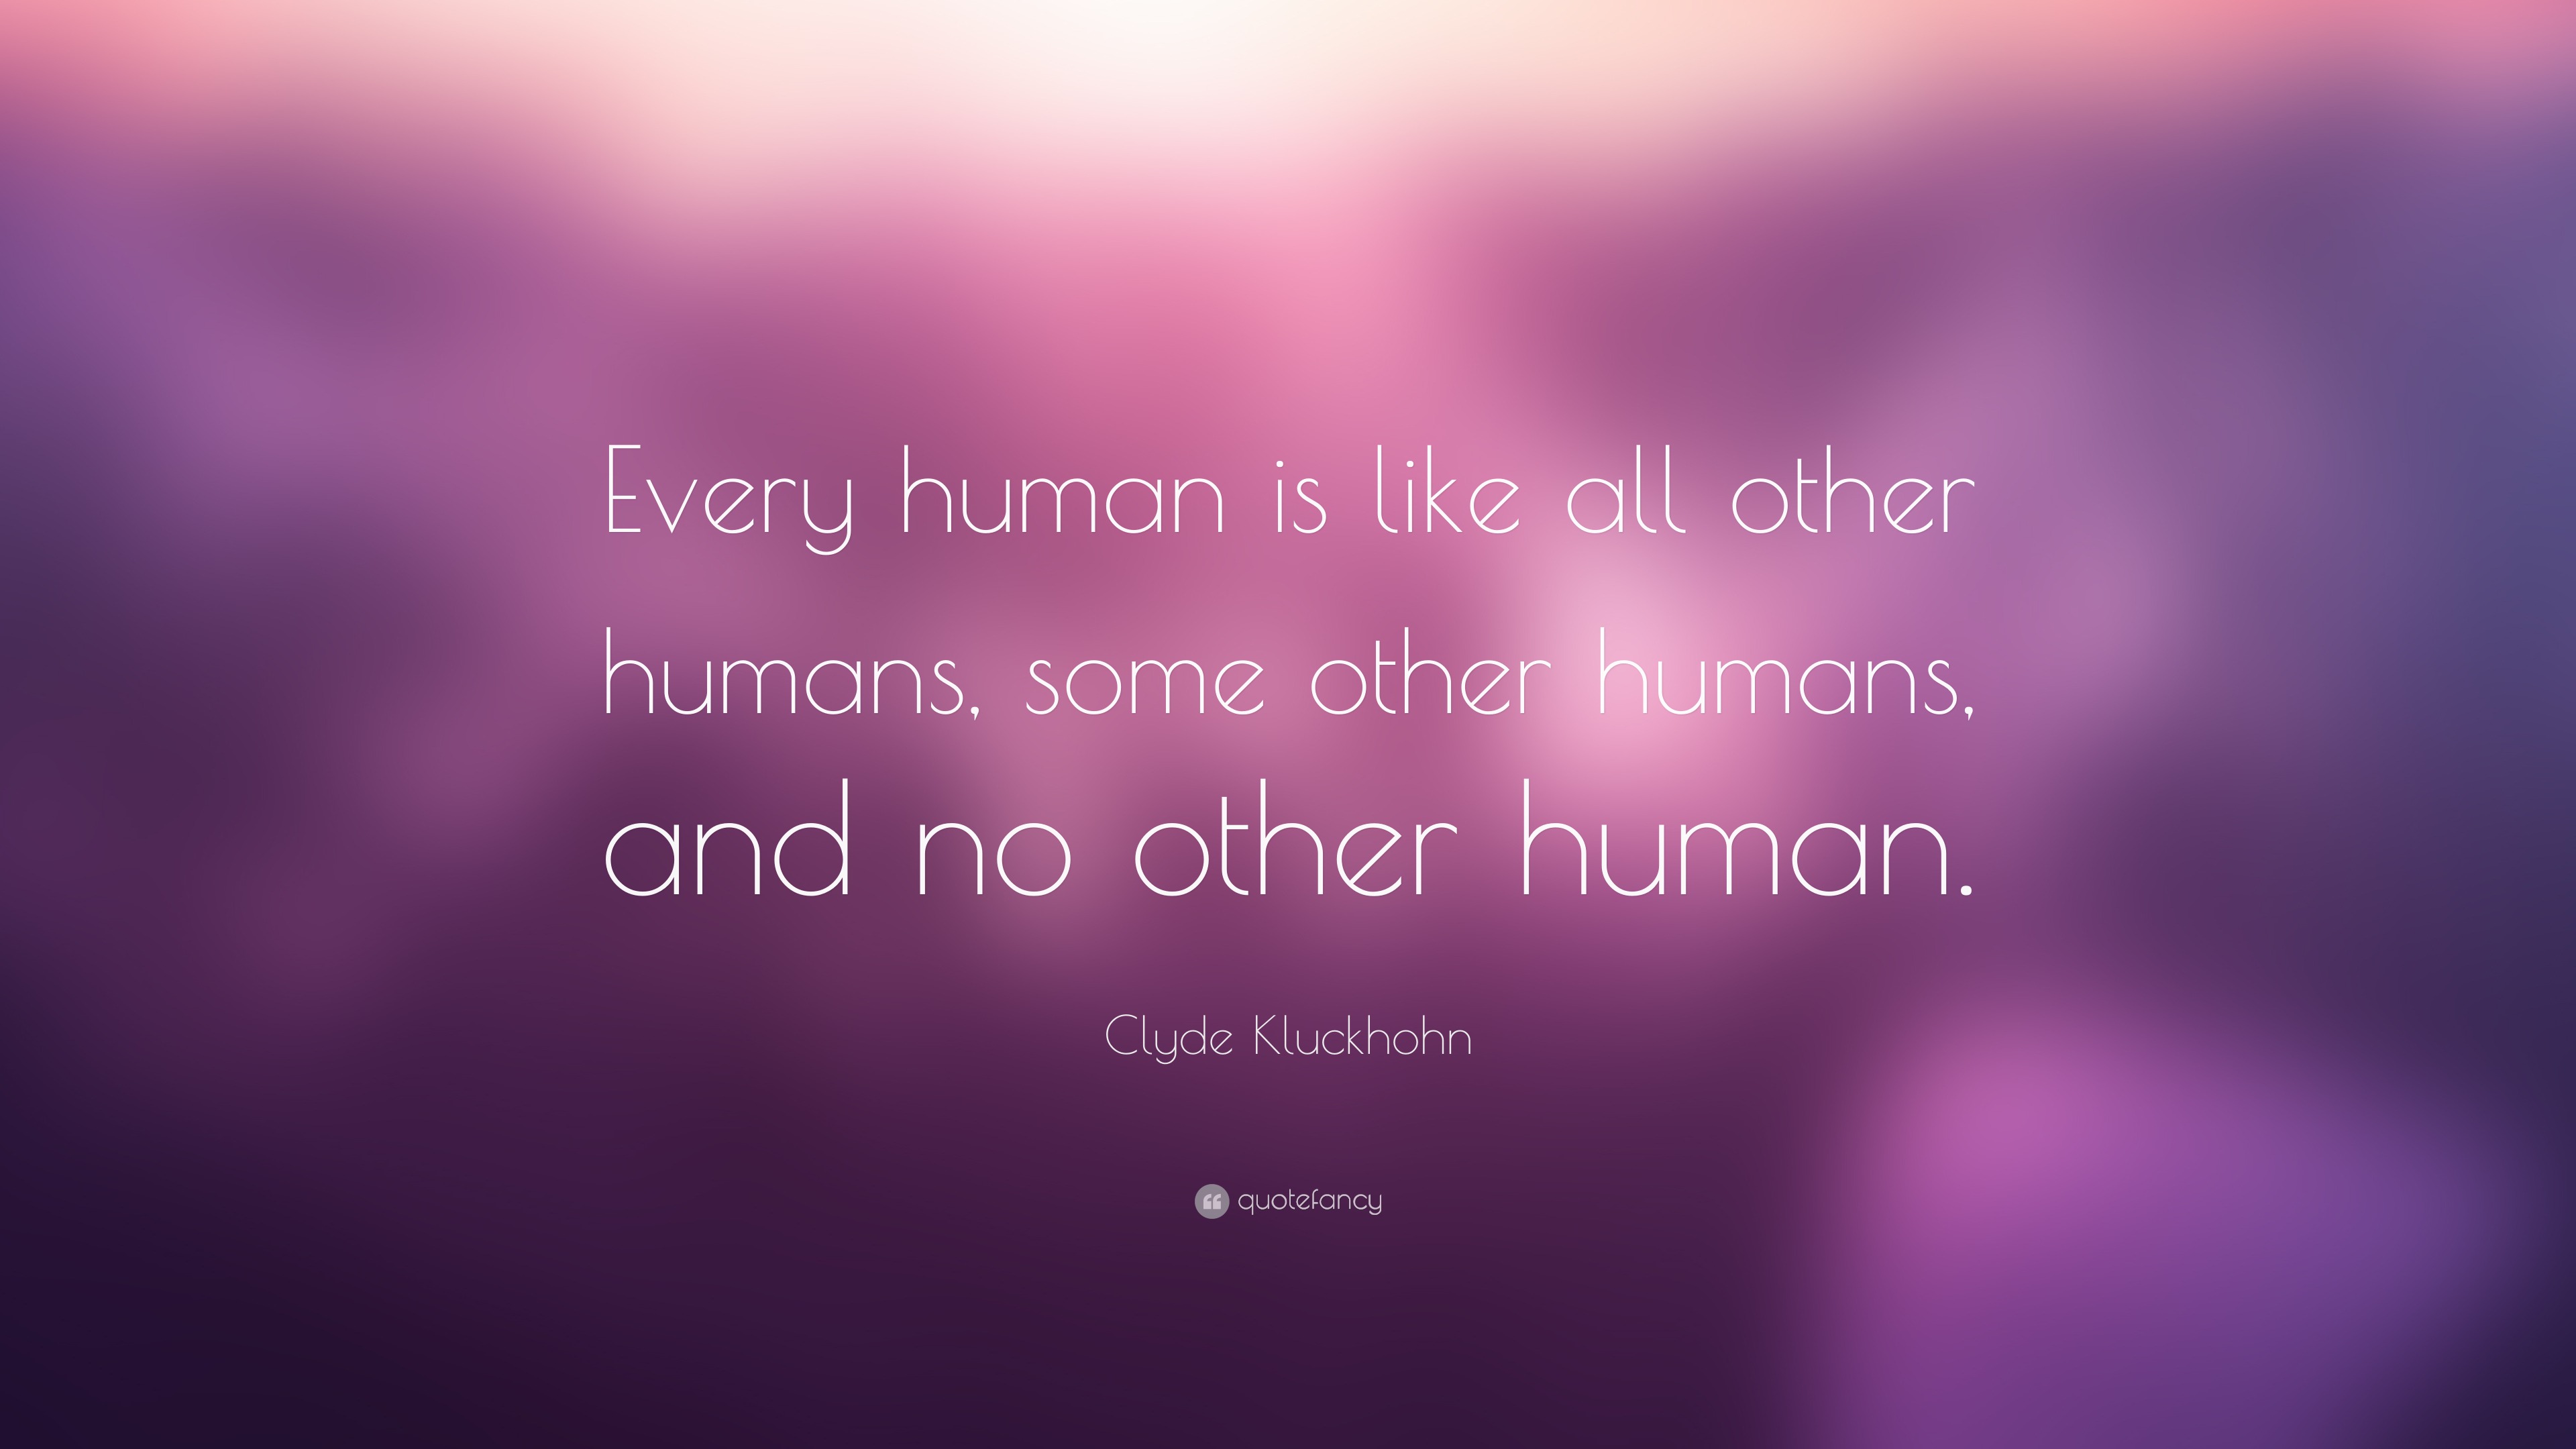 Clyde Kluckhohn Quote: “Every human is like all other humans, some ...